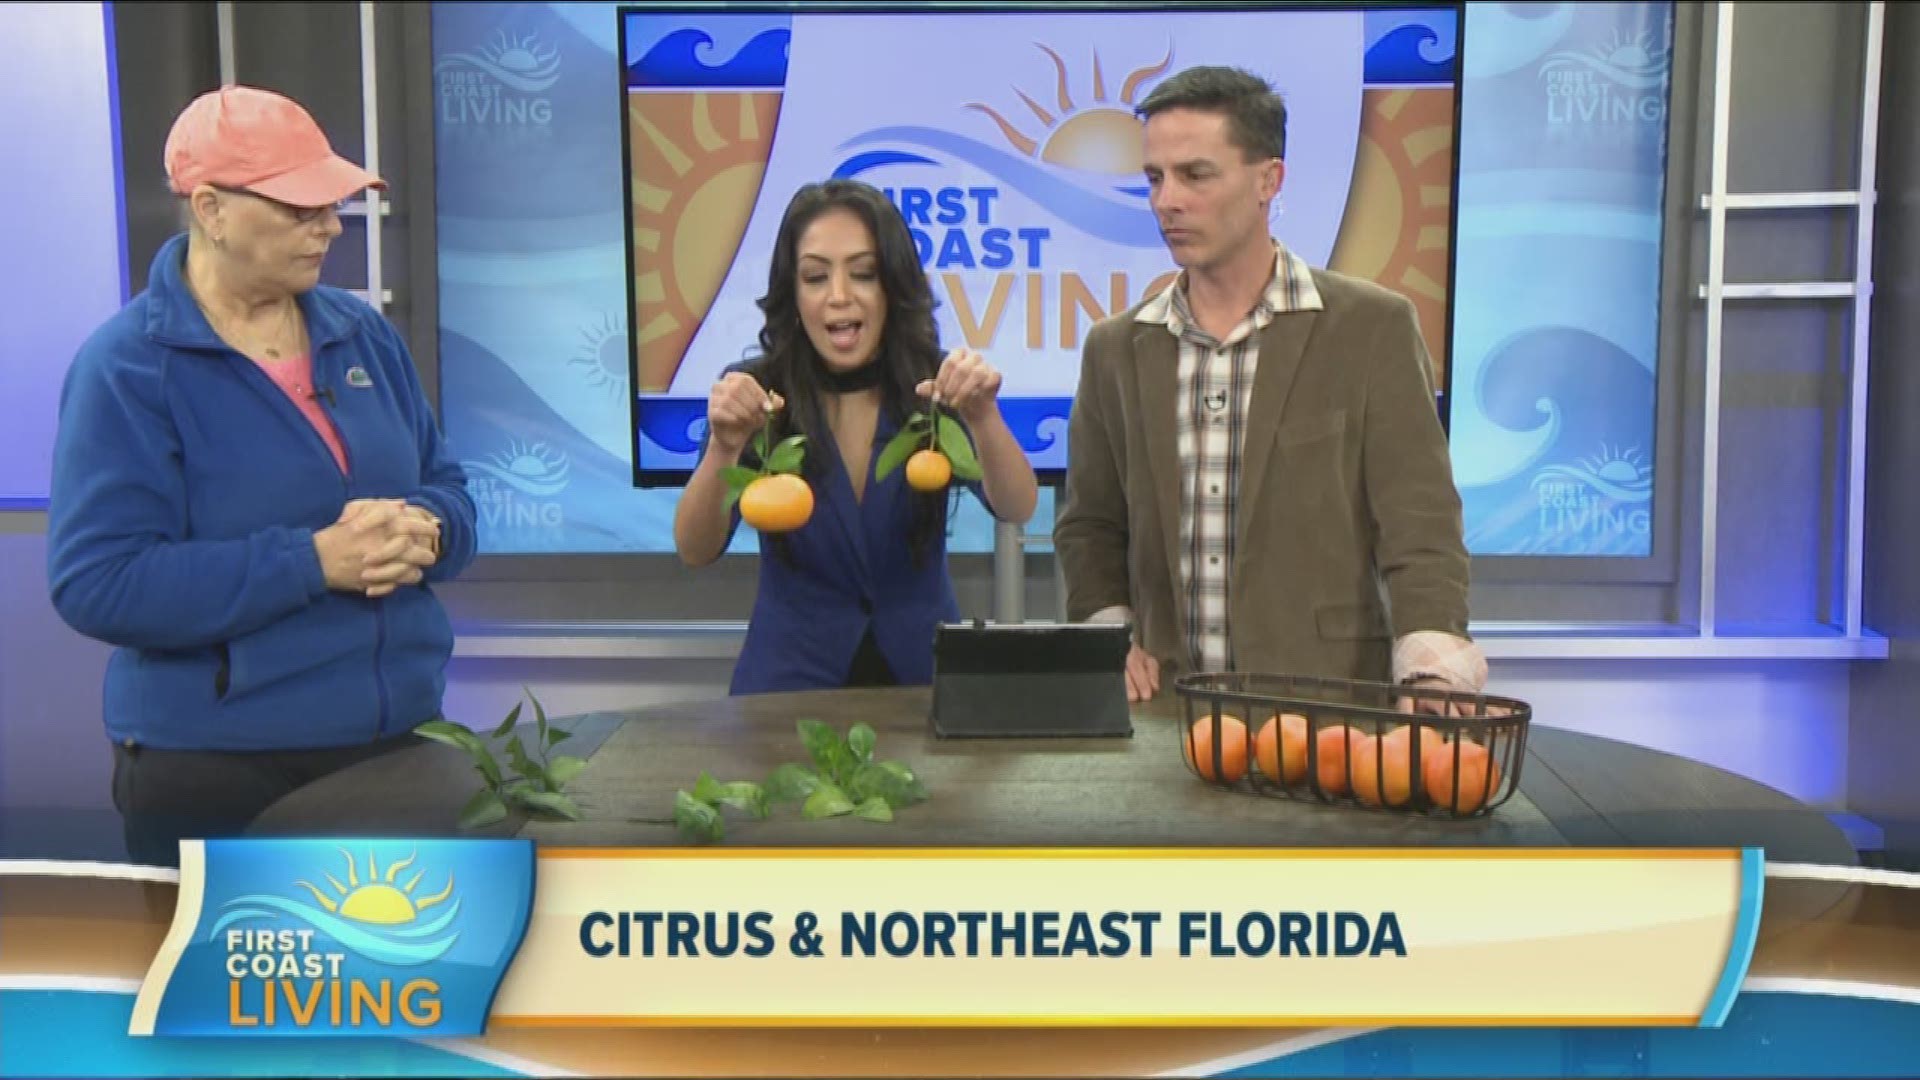 Rebecca Jordi with the Nassau County Extension Office shares tips on how to protect our plants during cold temperatures as well as let's us know what's currently damaging the citrus industry.